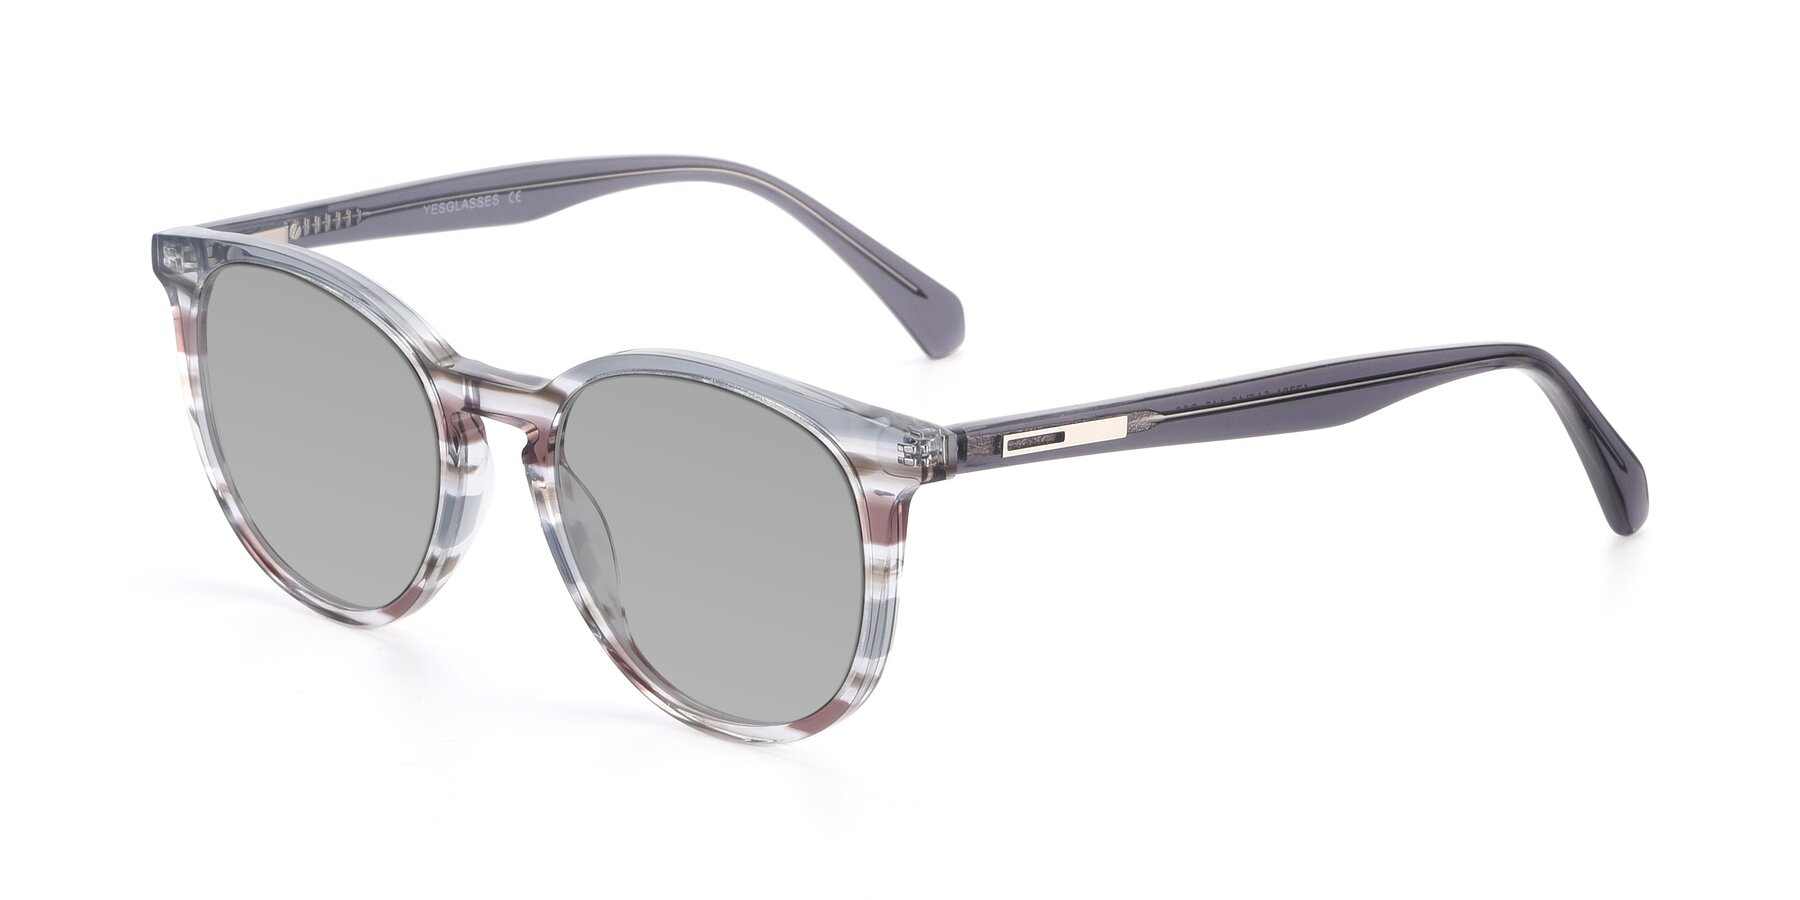 Angle of 17721 in Stripe Grey with Light Gray Tinted Lenses